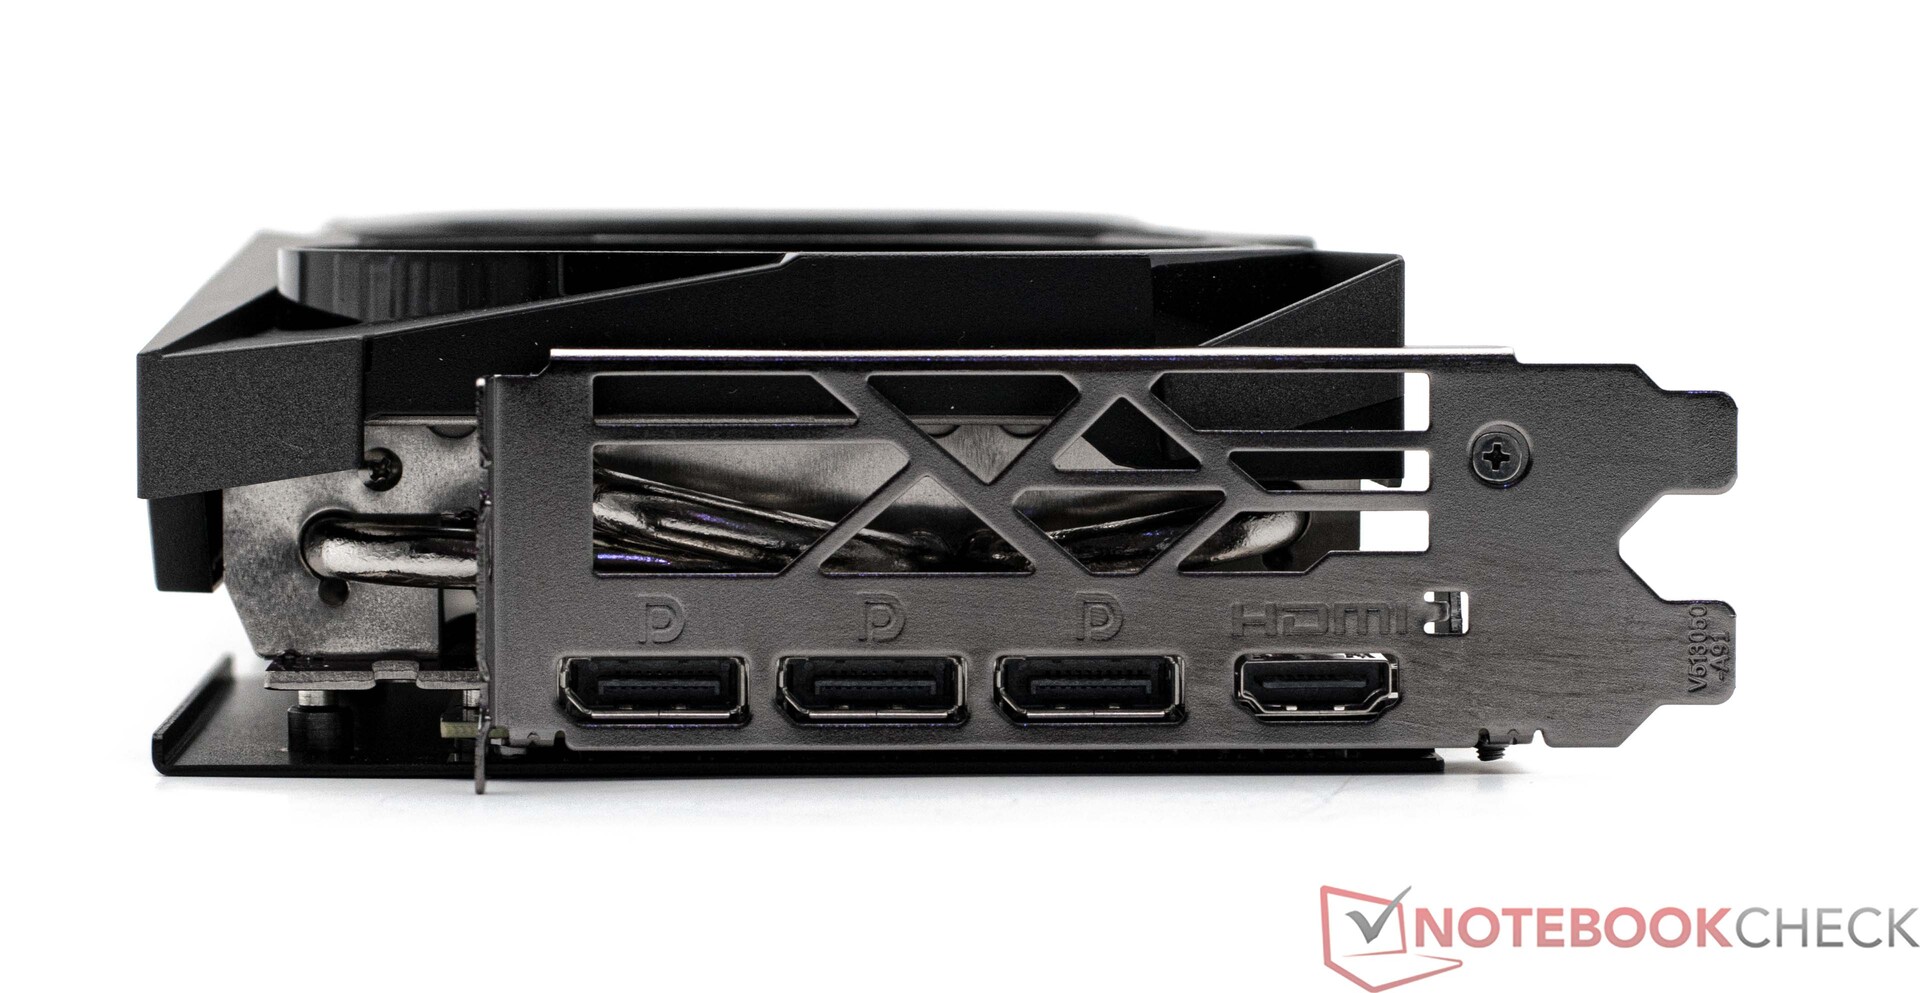 MSI GeForce RTX 4060 Ti desktop graphics card review: The mid